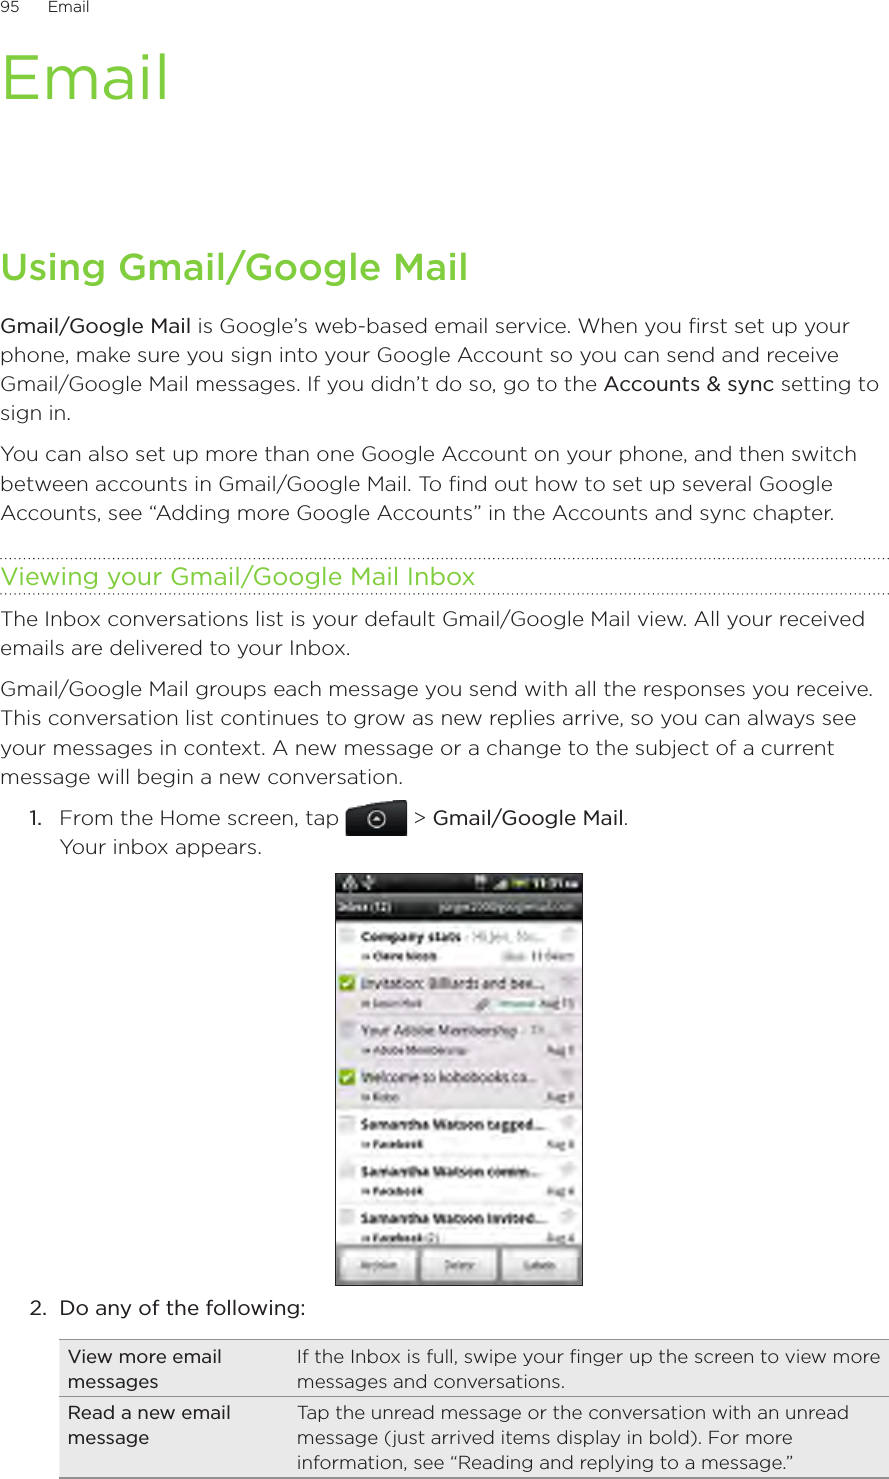 95      Email      EmailUsing Gmail/Google MailGmail/Google Mail is Google’s web-based email service. When you first set up your phone, make sure you sign into your Google Account so you can send and receive Gmail/Google Mail messages. If you didn’t do so, go to the Accounts &amp; sync setting to sign in.You can also set up more than one Google Account on your phone, and then switch between accounts in Gmail/Google Mail. To find out how to set up several Google Accounts, see “Adding more Google Accounts” in the Accounts and sync chapter.Viewing your Gmail/Google Mail InboxThe Inbox conversations list is your default Gmail/Google Mail view. All your received emails are delivered to your Inbox.Gmail/Google Mail groups each message you send with all the responses you receive. This conversation list continues to grow as new replies arrive, so you can always see your messages in context. A new message or a change to the subject of a current message will begin a new conversation.1.  From the Home screen, tap   &gt; Gmail/Google Mail. Your inbox appears.2.  Do any of the following:View more email messagesIf the Inbox is full, swipe your finger up the screen to view more messages and conversations.Read a new email messageTap the unread message or the conversation with an unread message (just arrived items display in bold). For more information, see “Reading and replying to a message.”